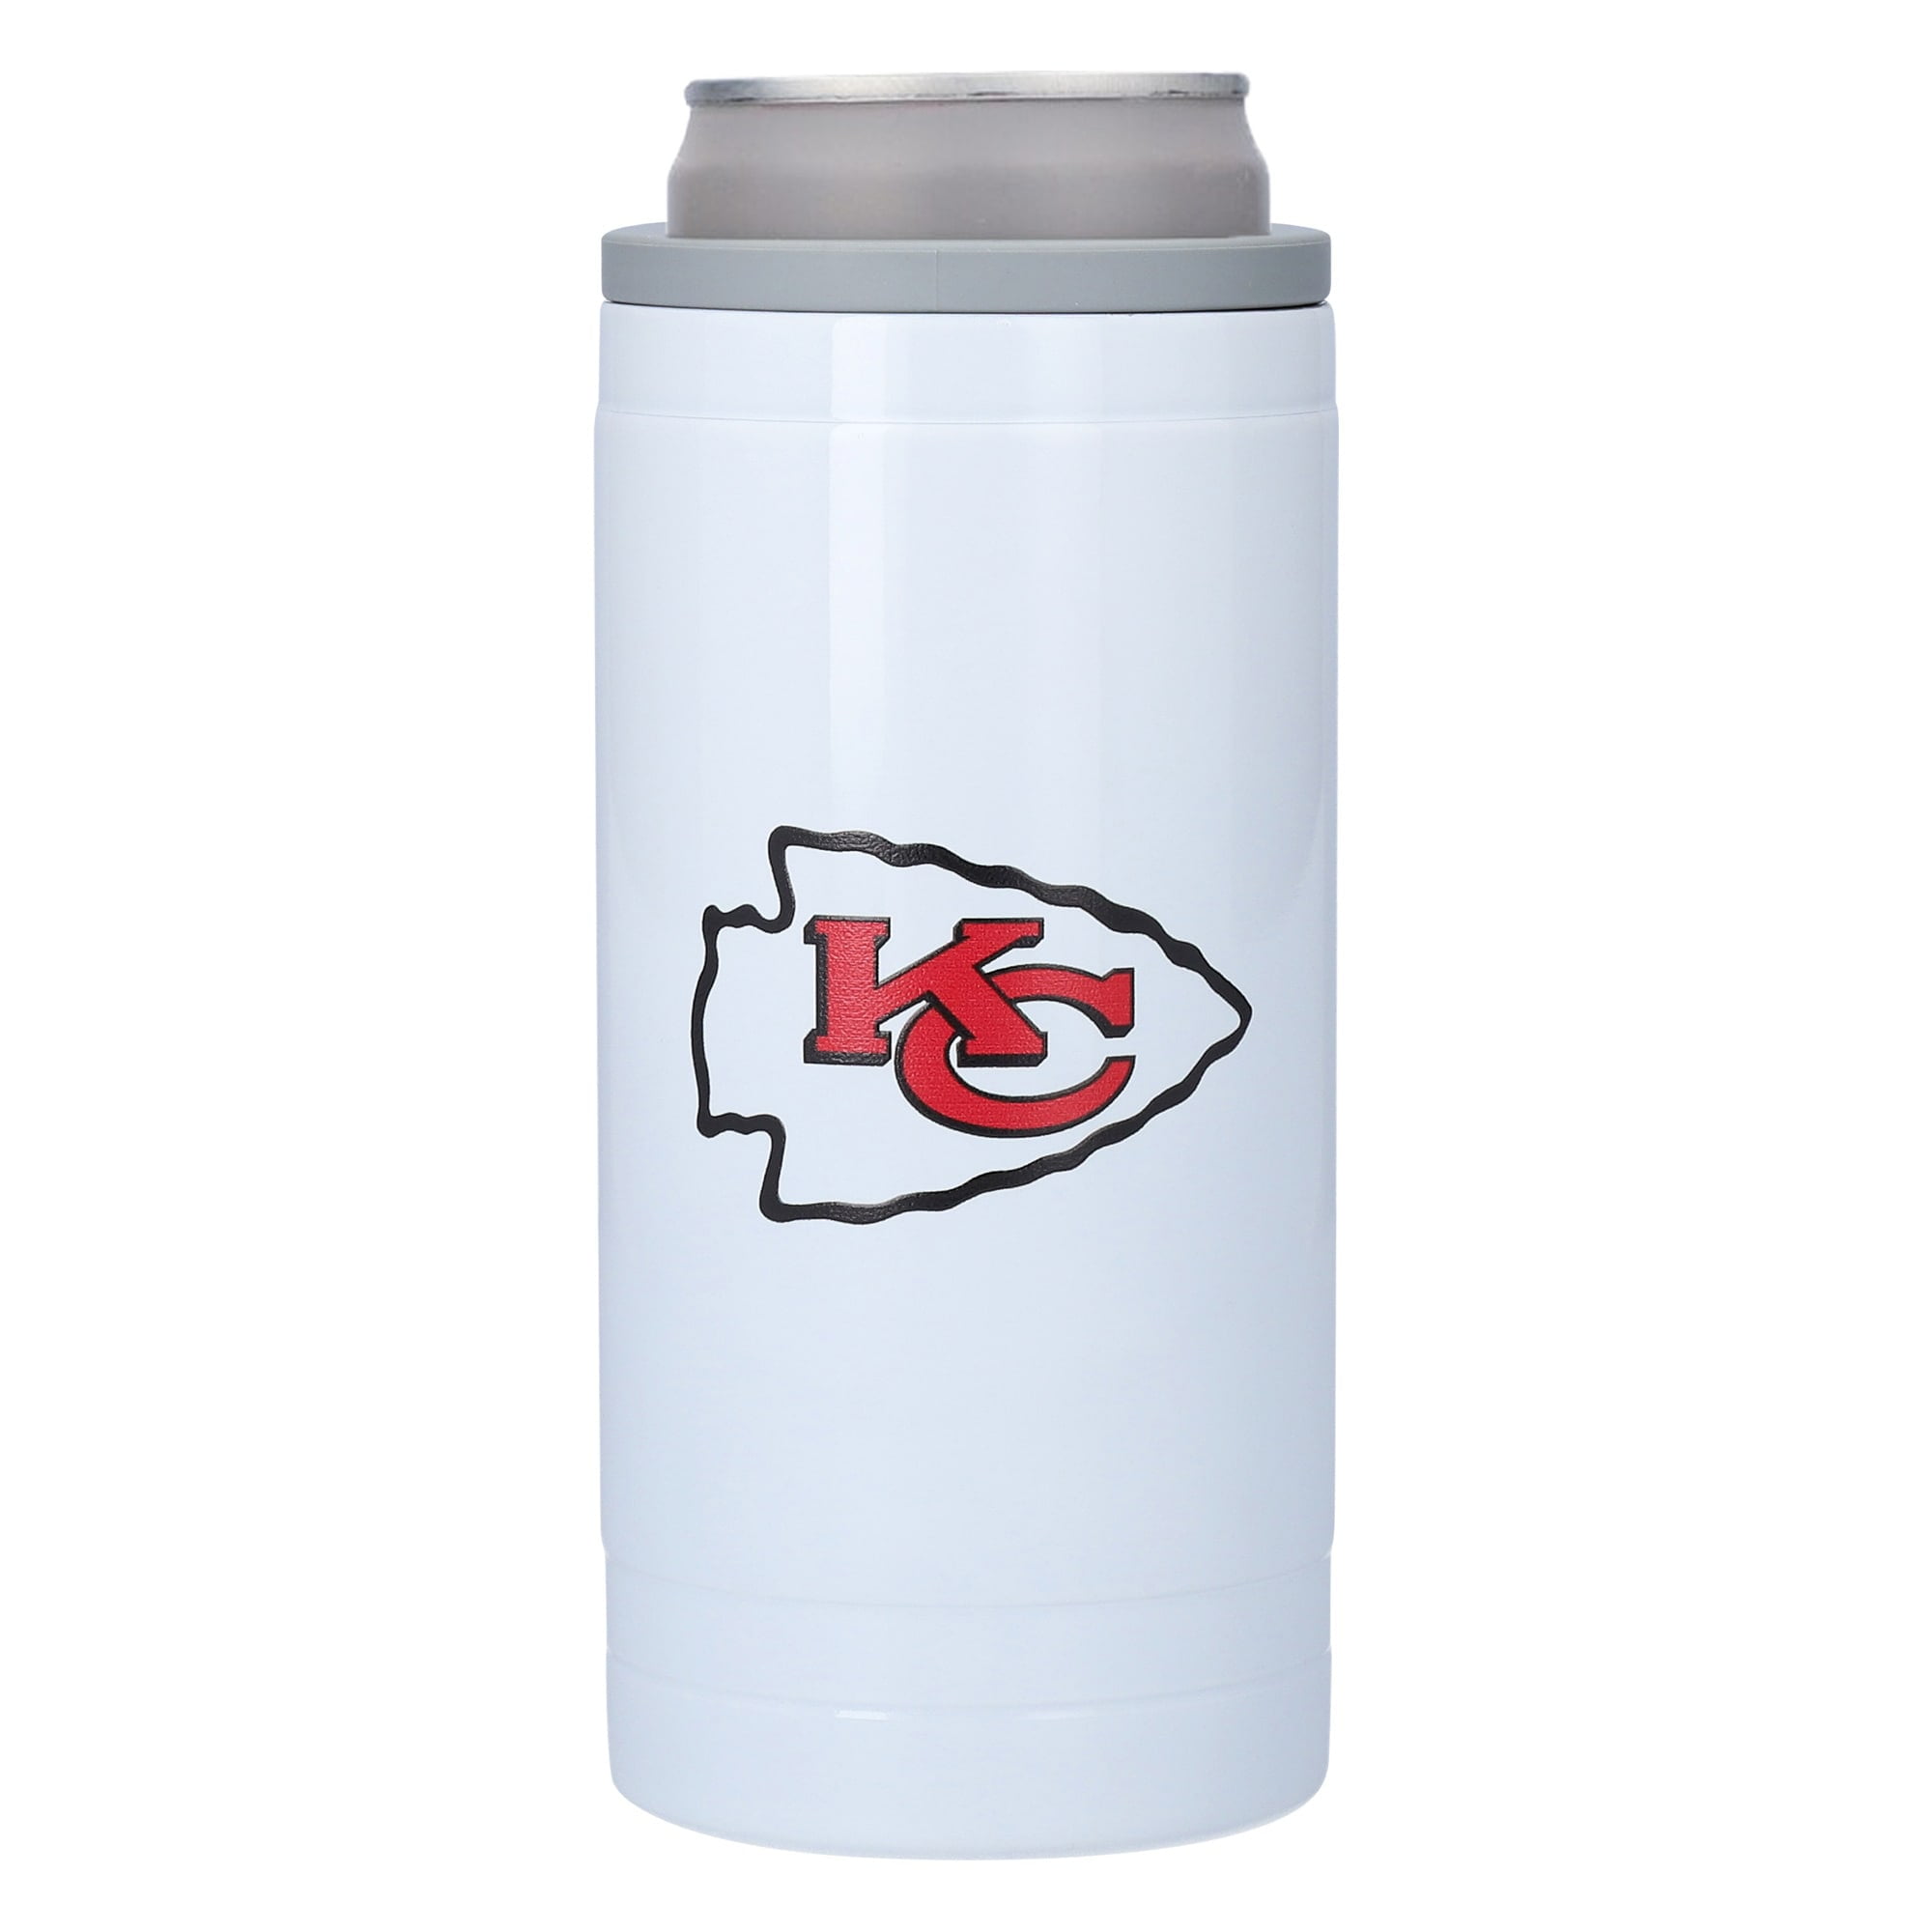 Football Fan Shop Cleveland Browns 12oz. Letterman Slim Can Cooler - Yahoo  Shopping